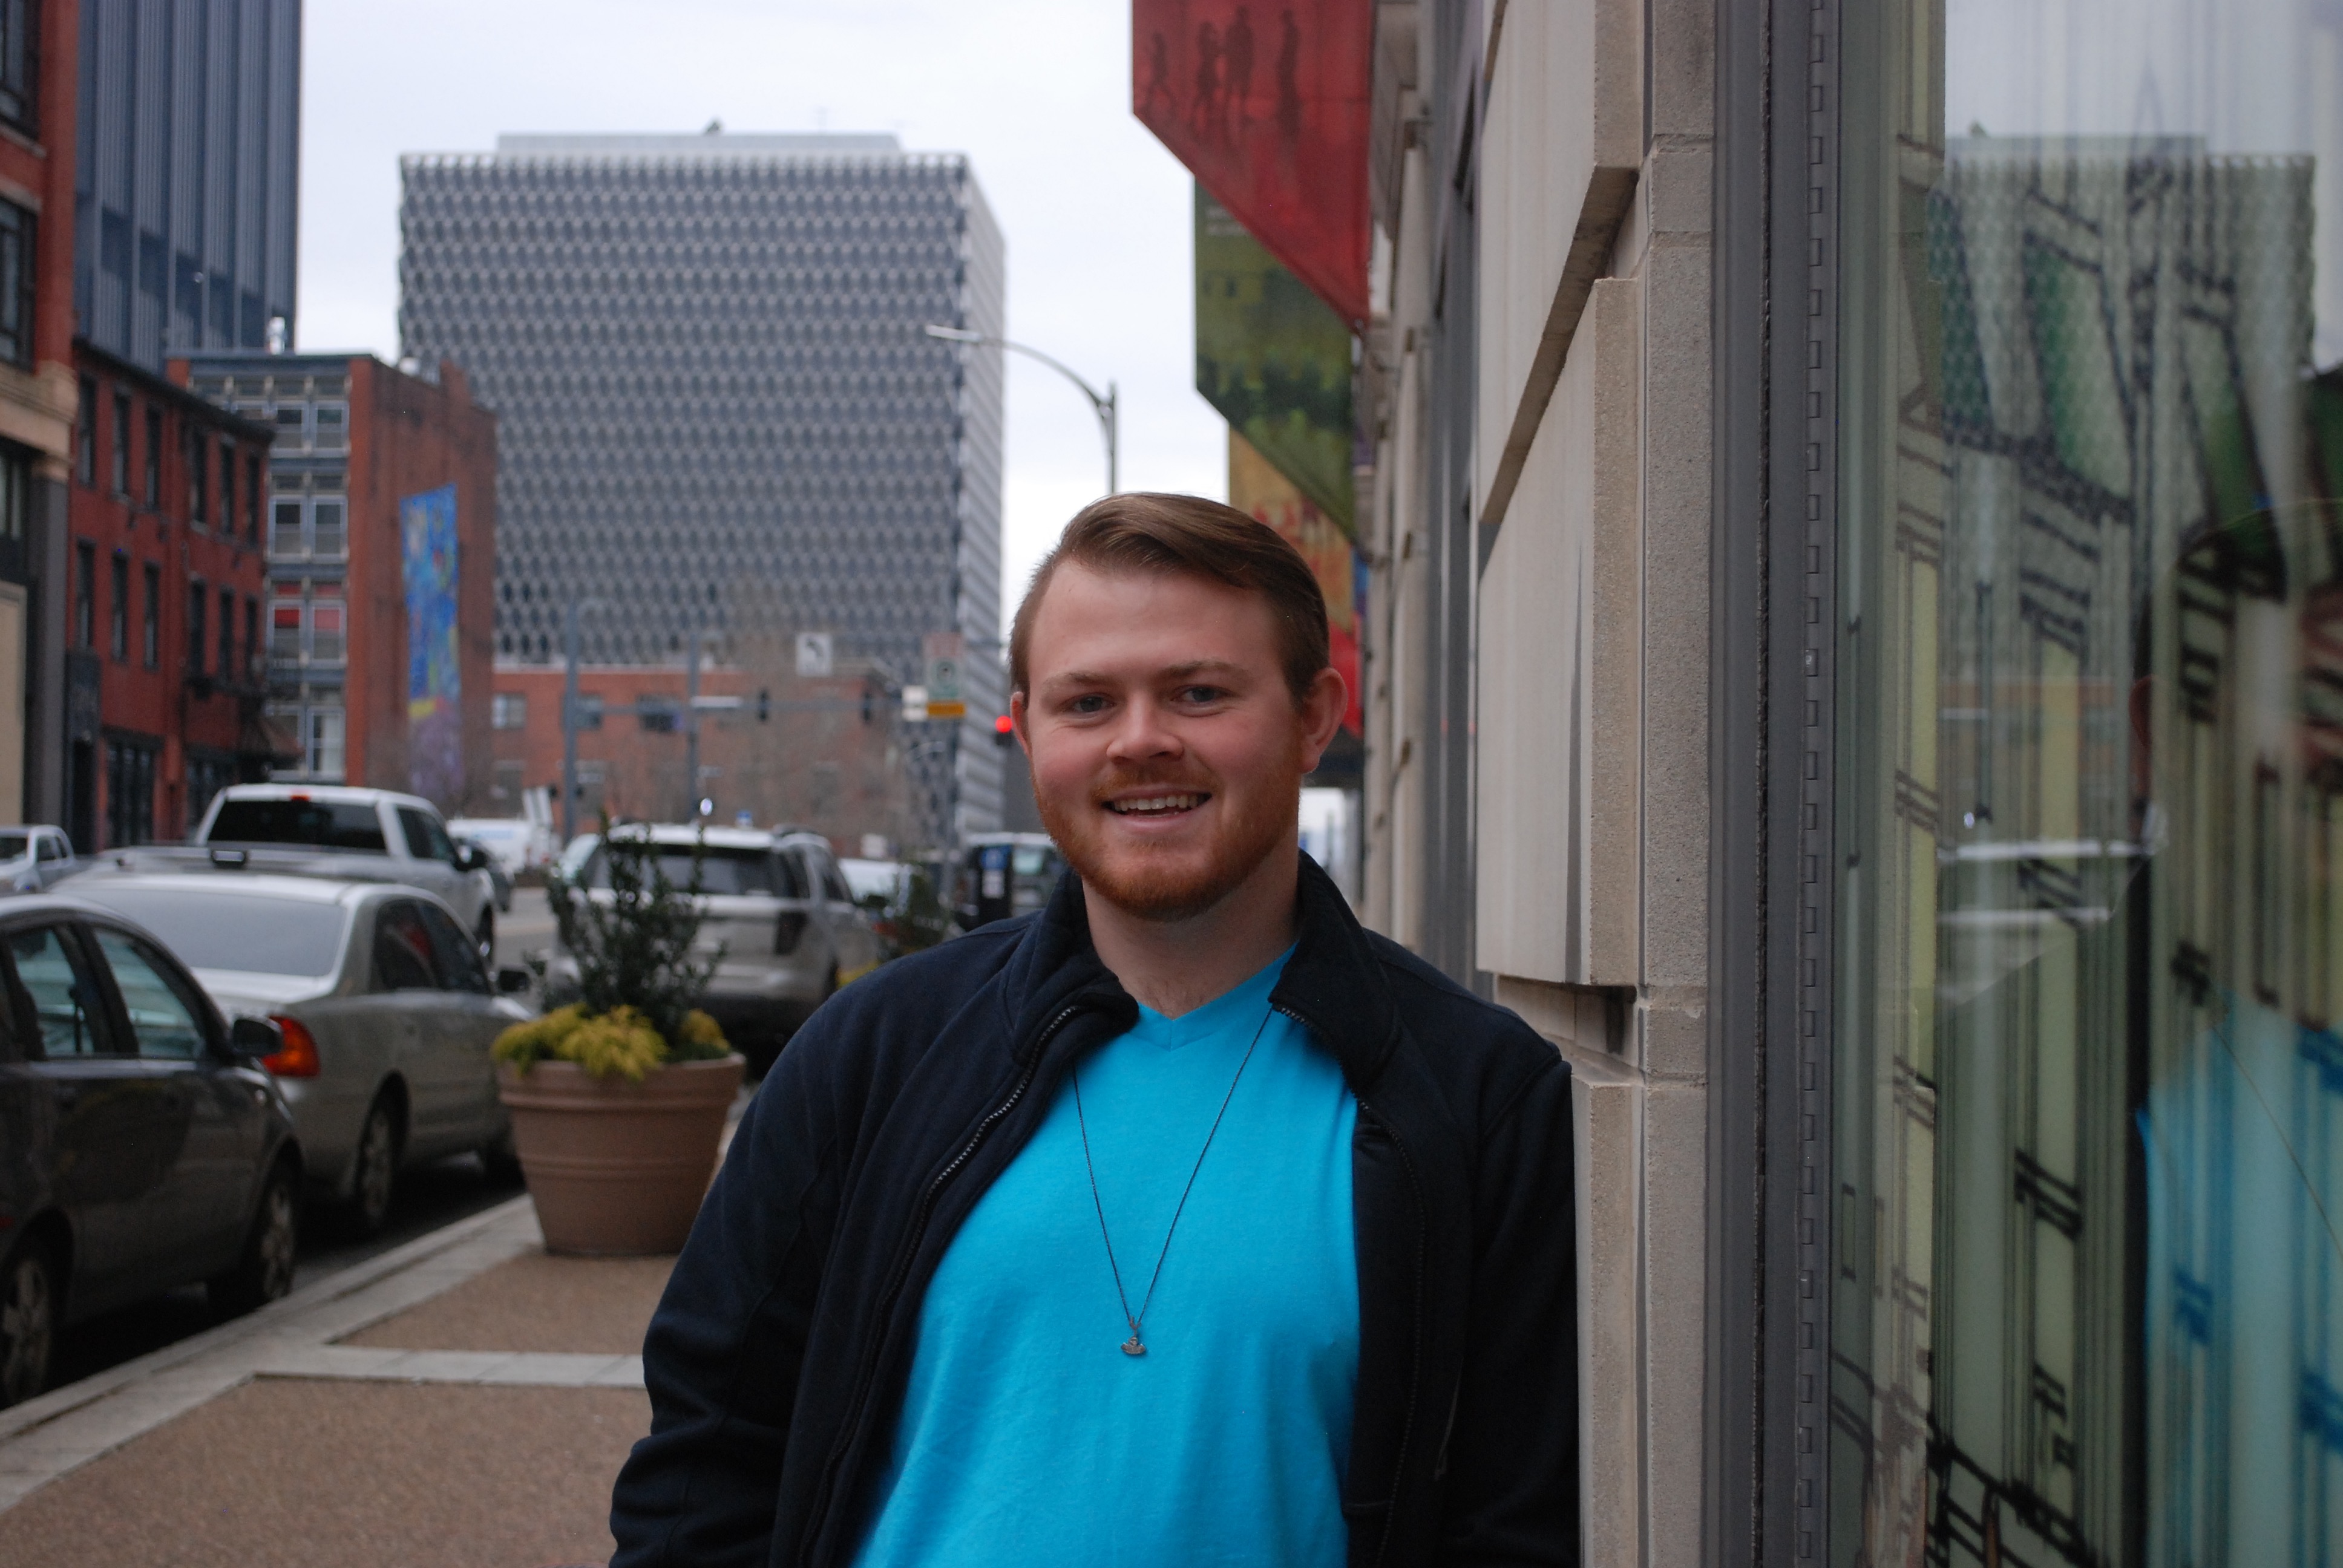 Pictured is Zachary Brown, cinema production major